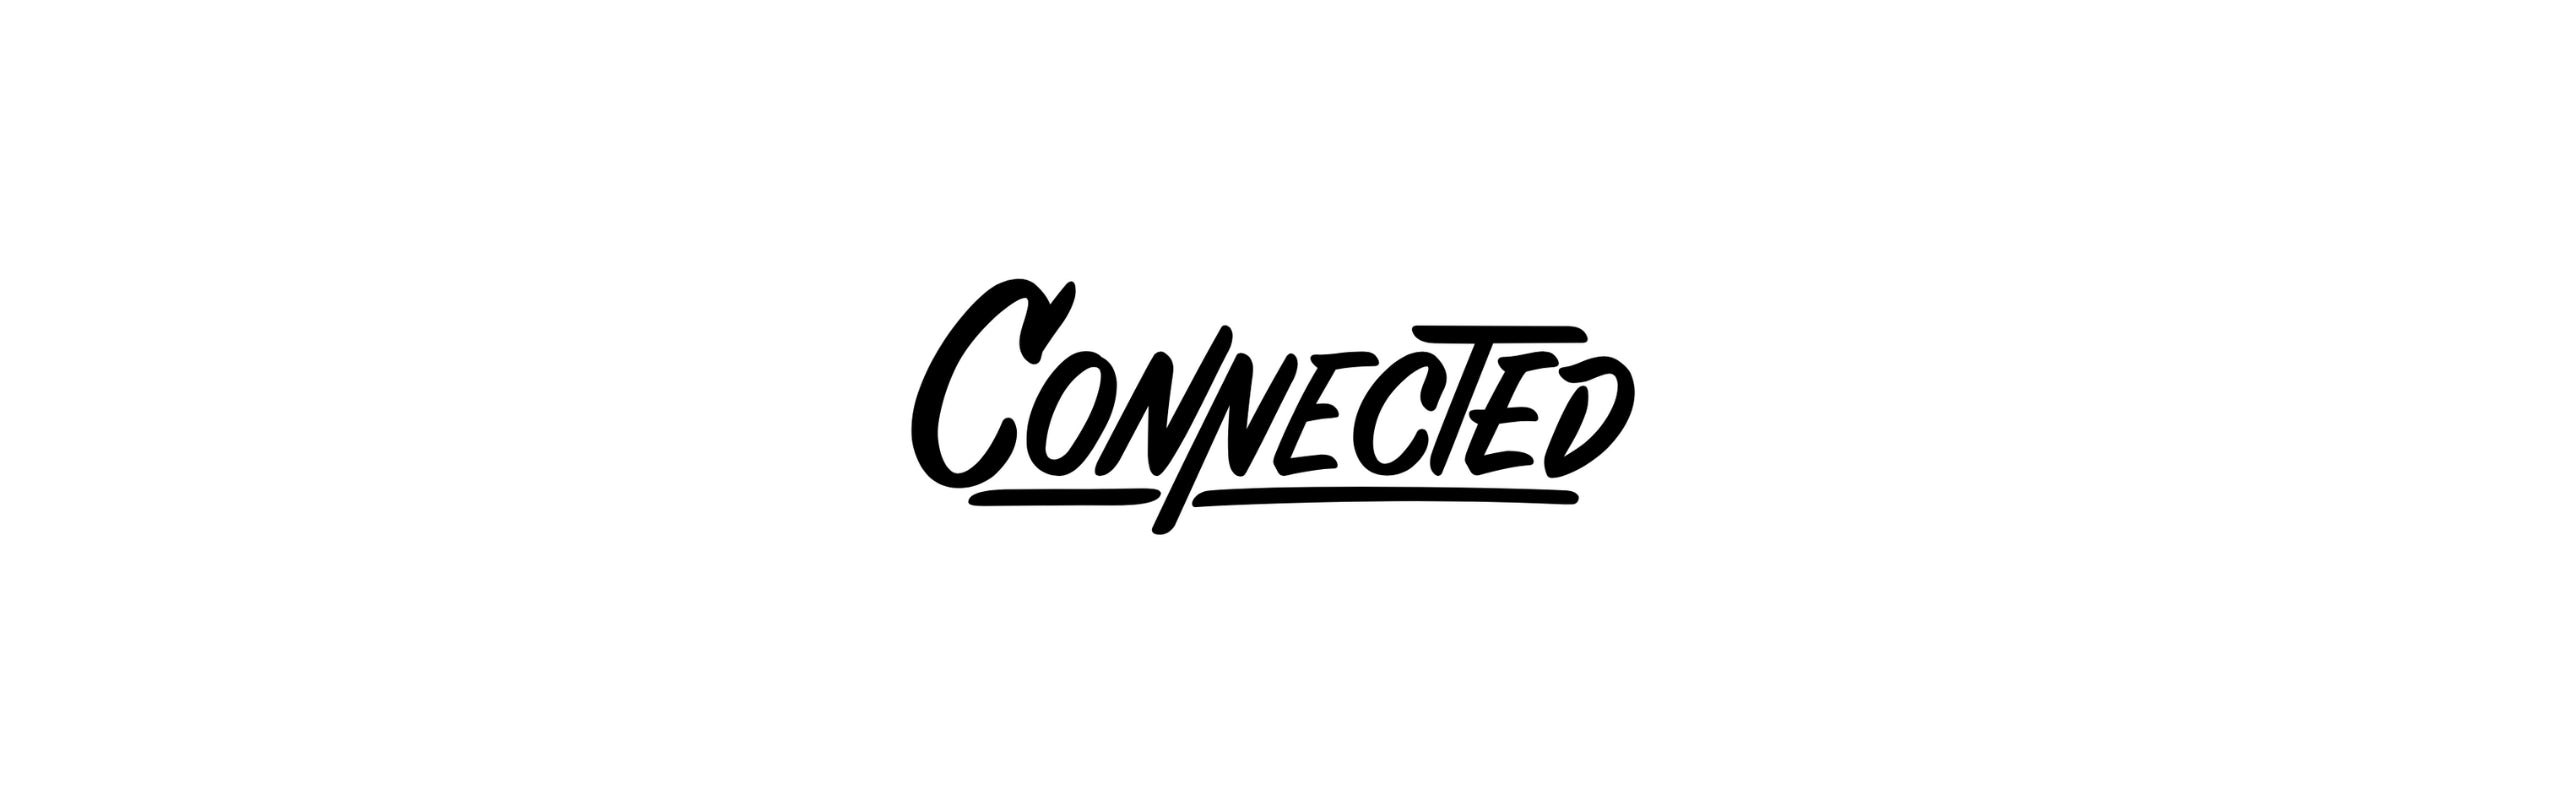 Connected Cannabis Co. banner